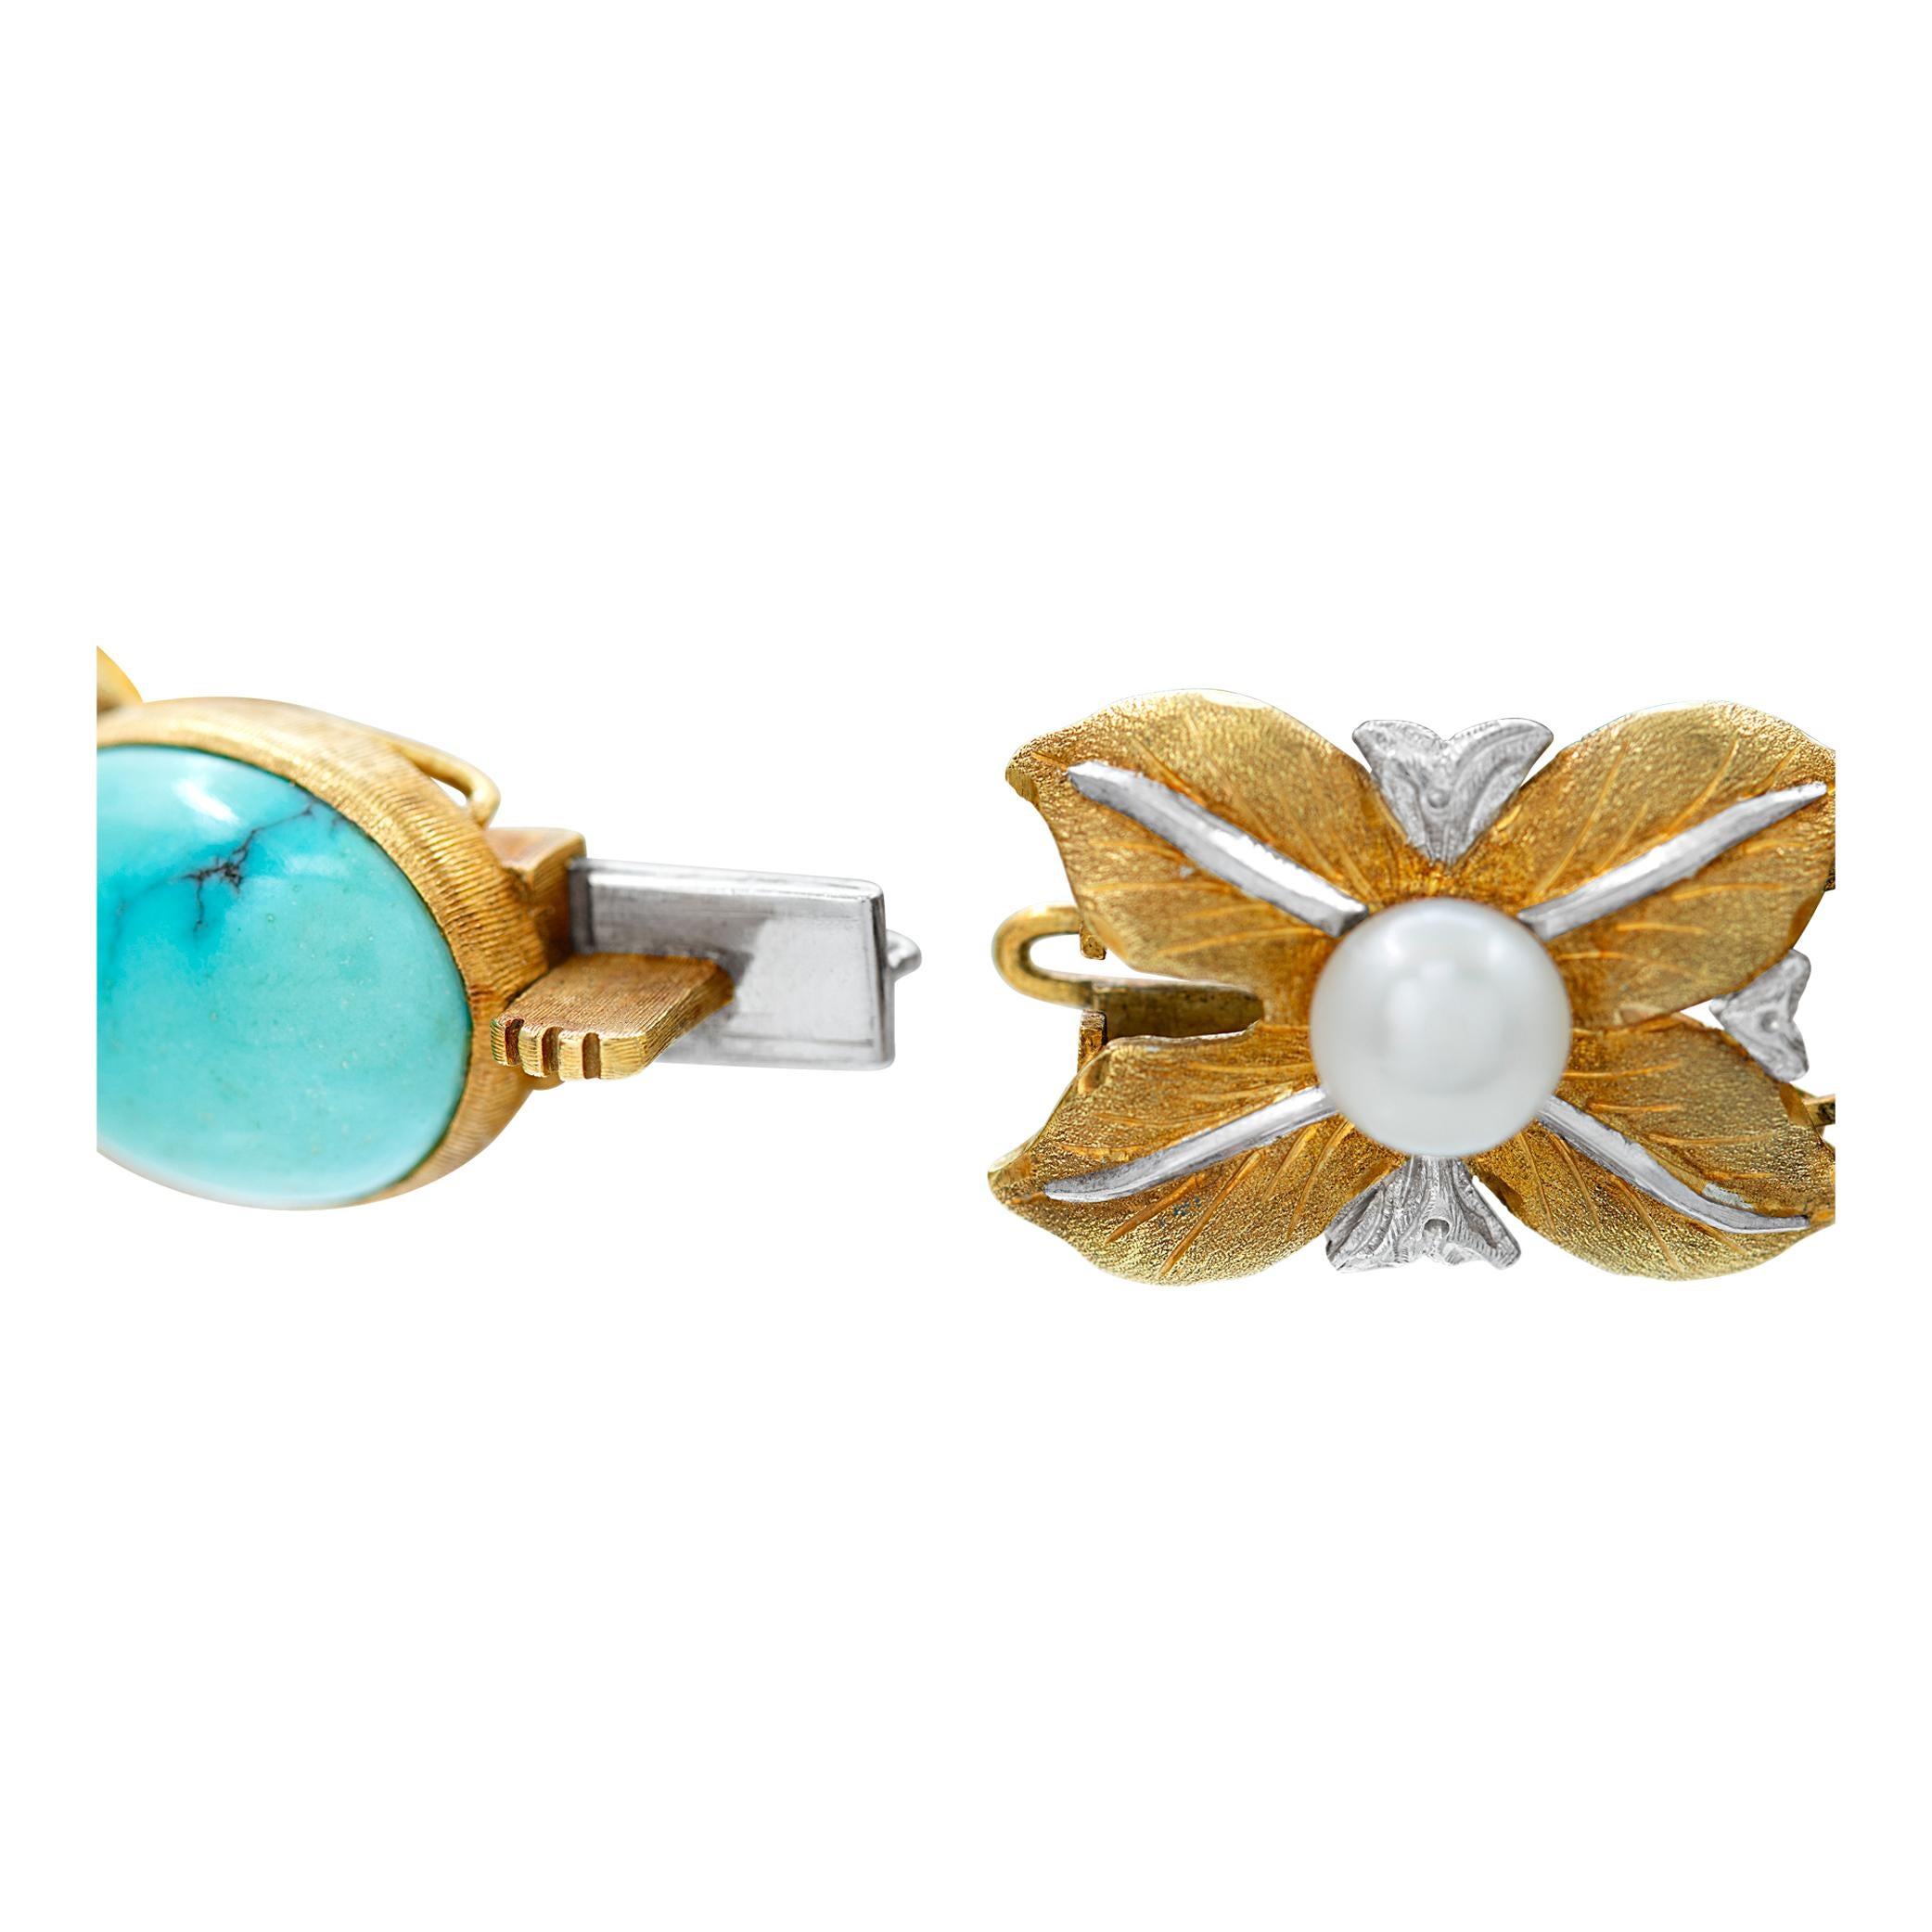 Buccellatti Leaf Motif Pearl and Turquoise Bracelet in 18k For Sale 1